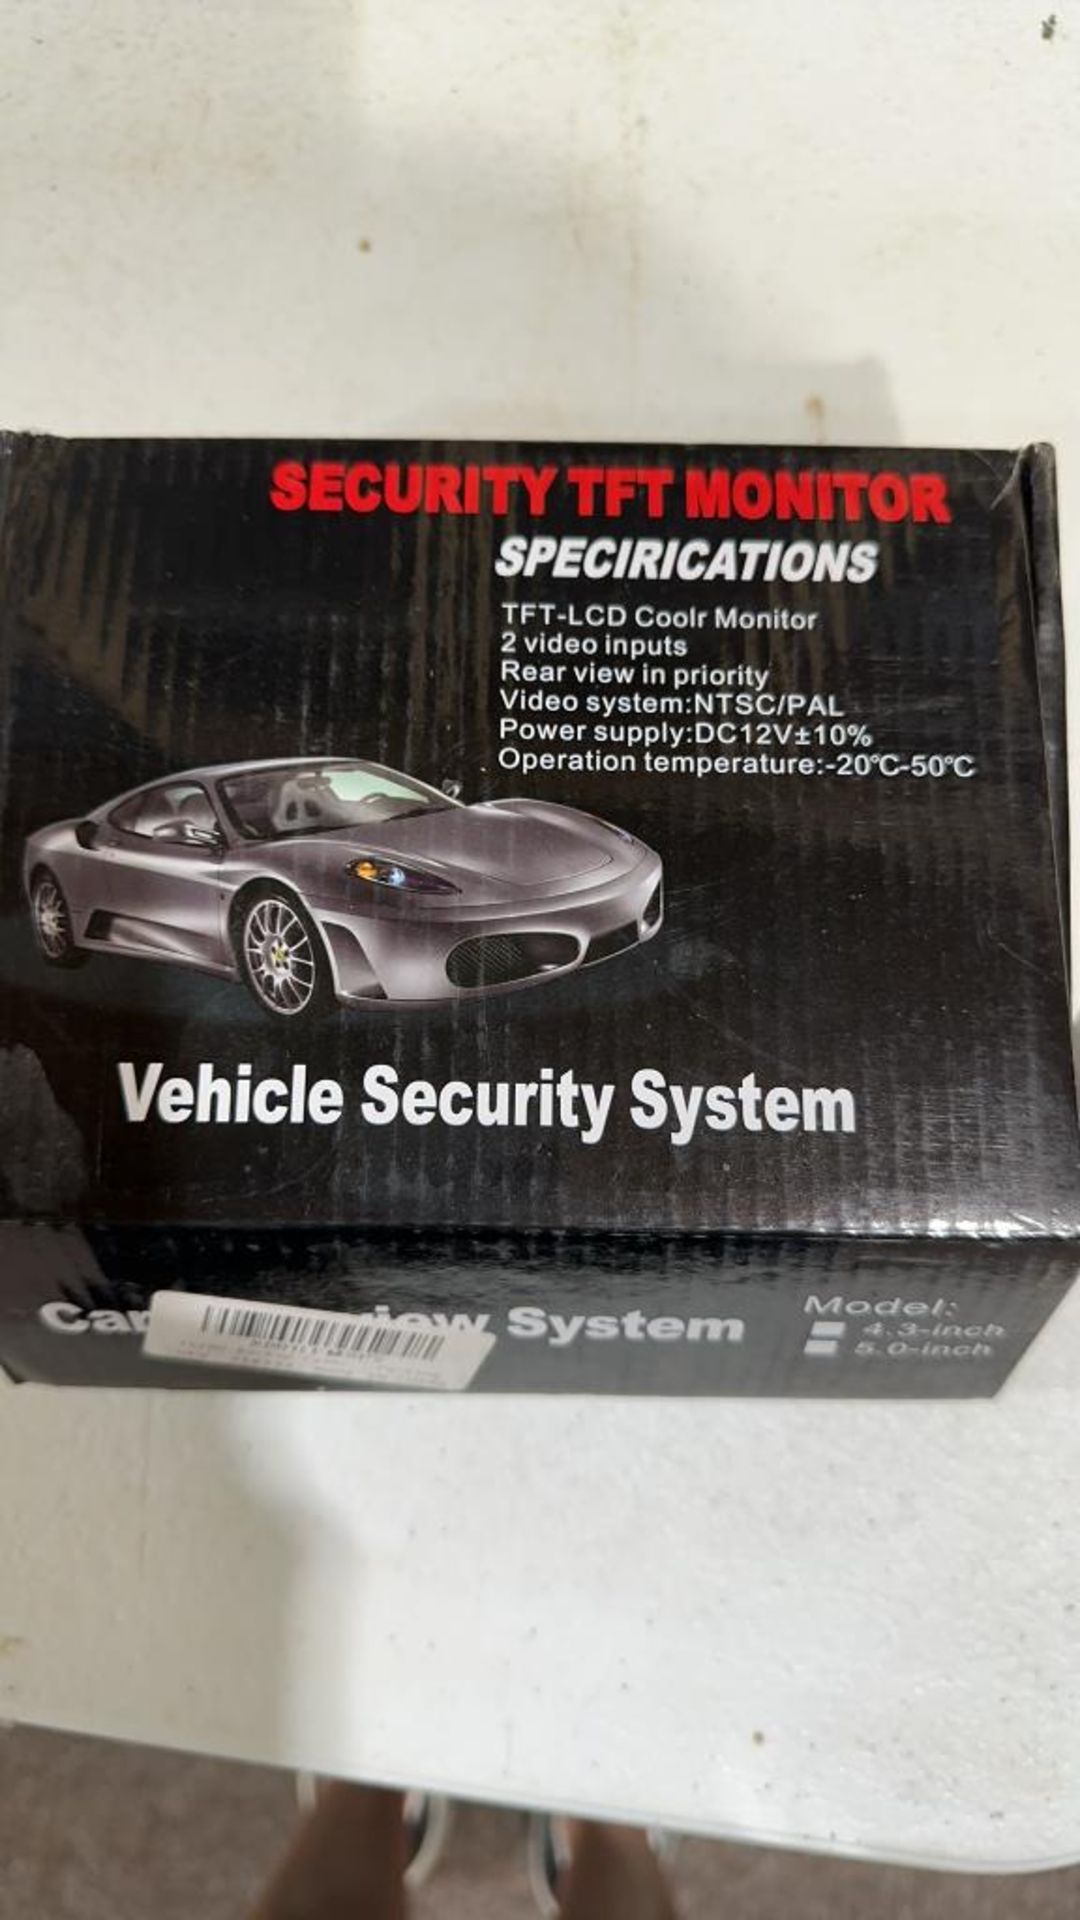 Vehicle security system - Image 3 of 9